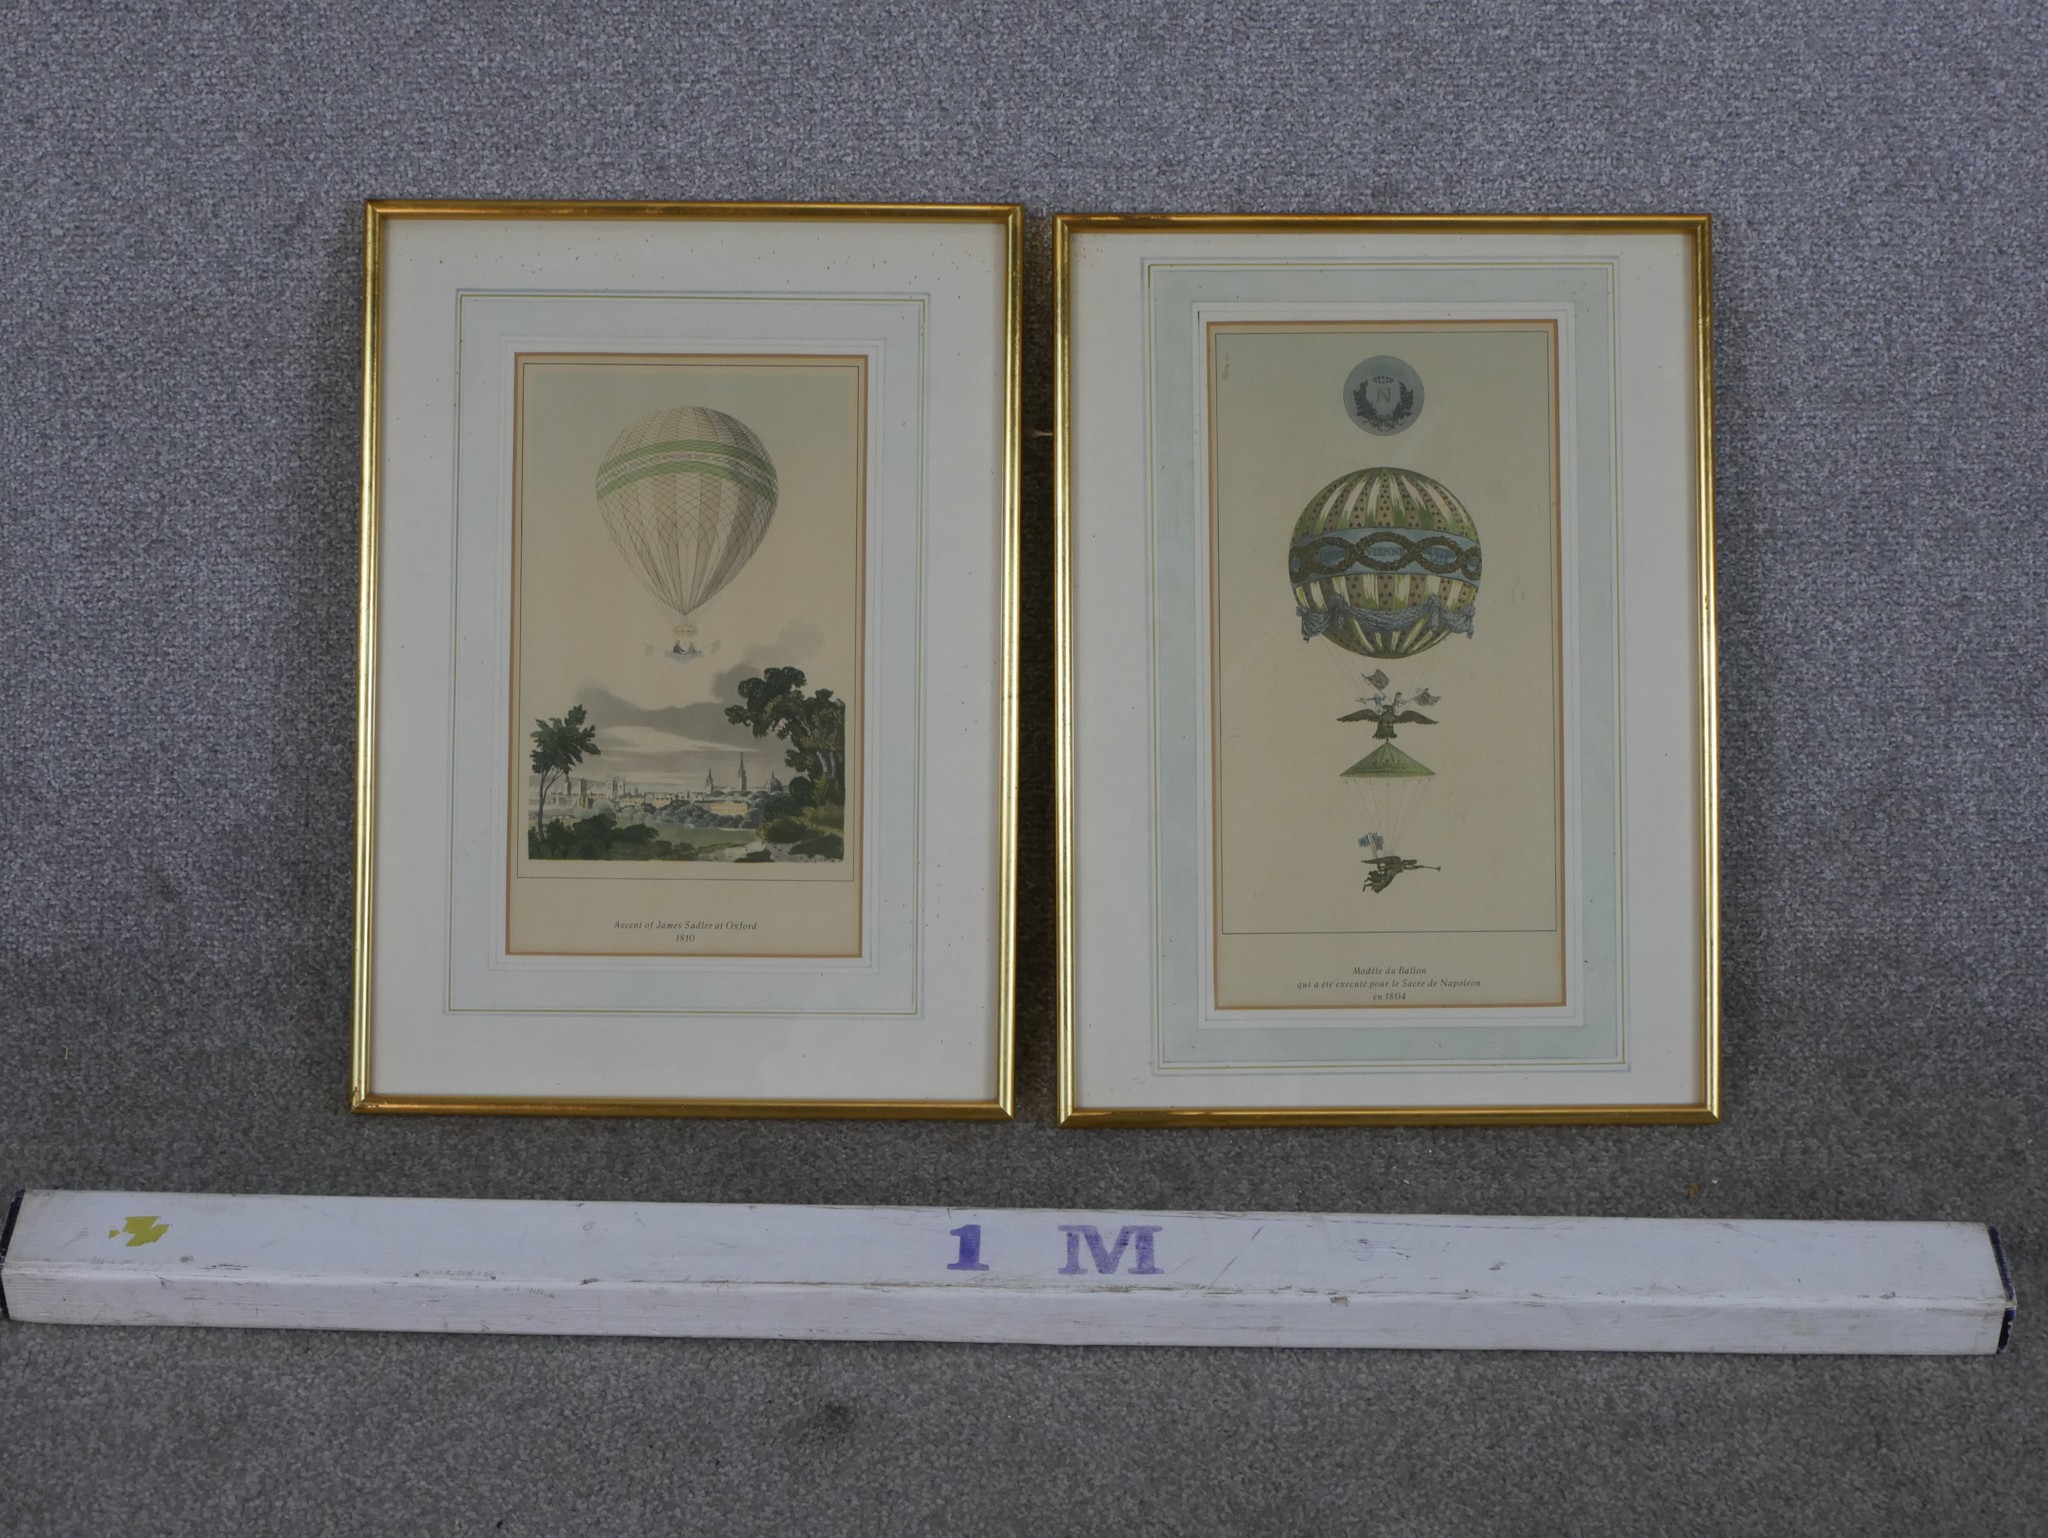 Ascent of James Sadler Two & Modele du Balloon two hot balloon related coloured prints, each - Image 2 of 6